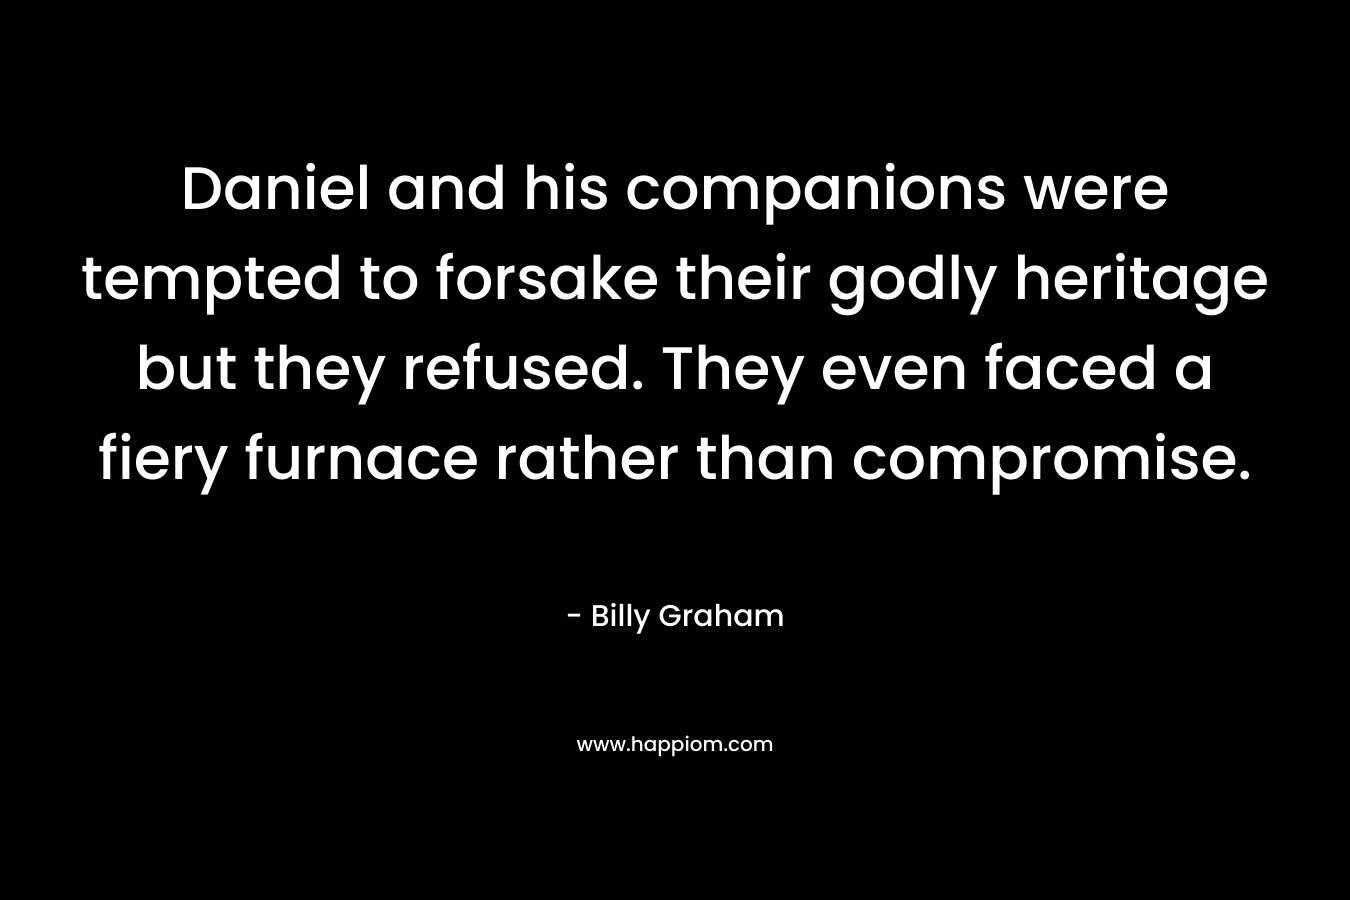 Daniel and his companions were tempted to forsake their godly heritage but they refused. They even faced a fiery furnace rather than compromise.